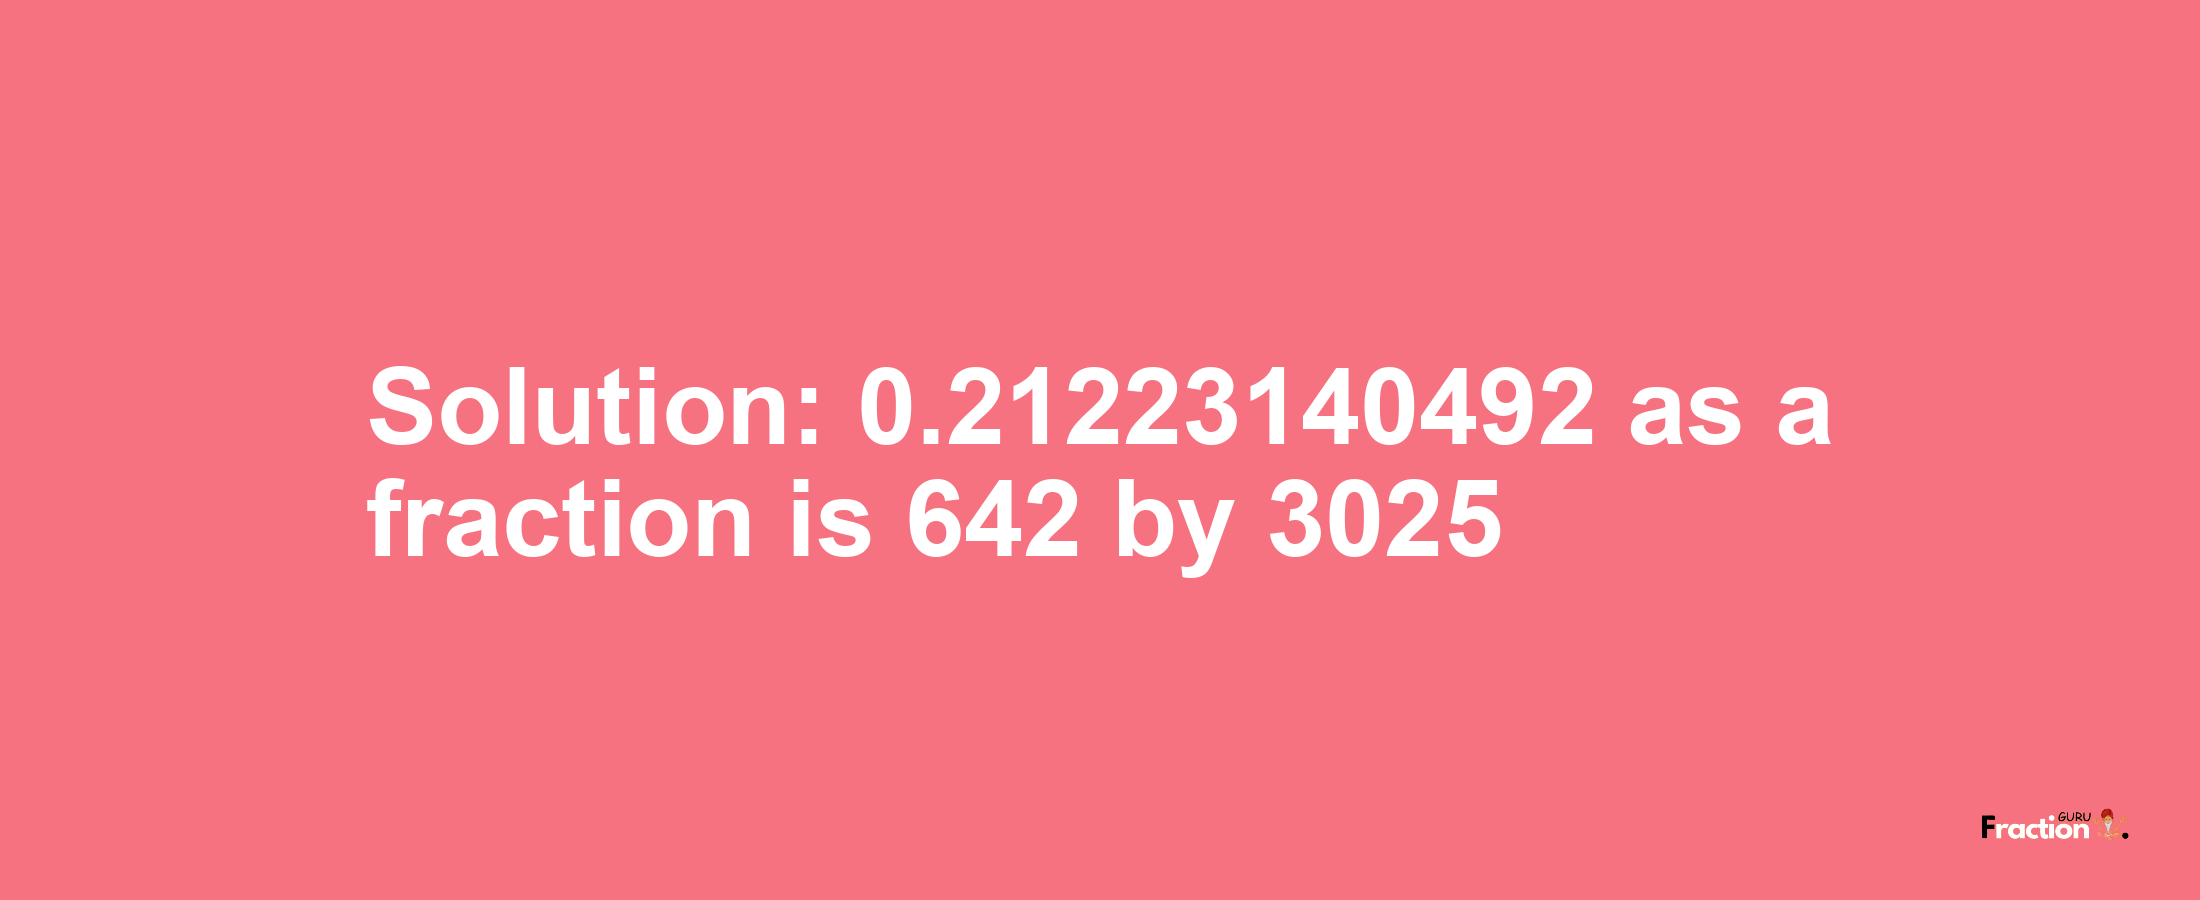 Solution:0.21223140492 as a fraction is 642/3025